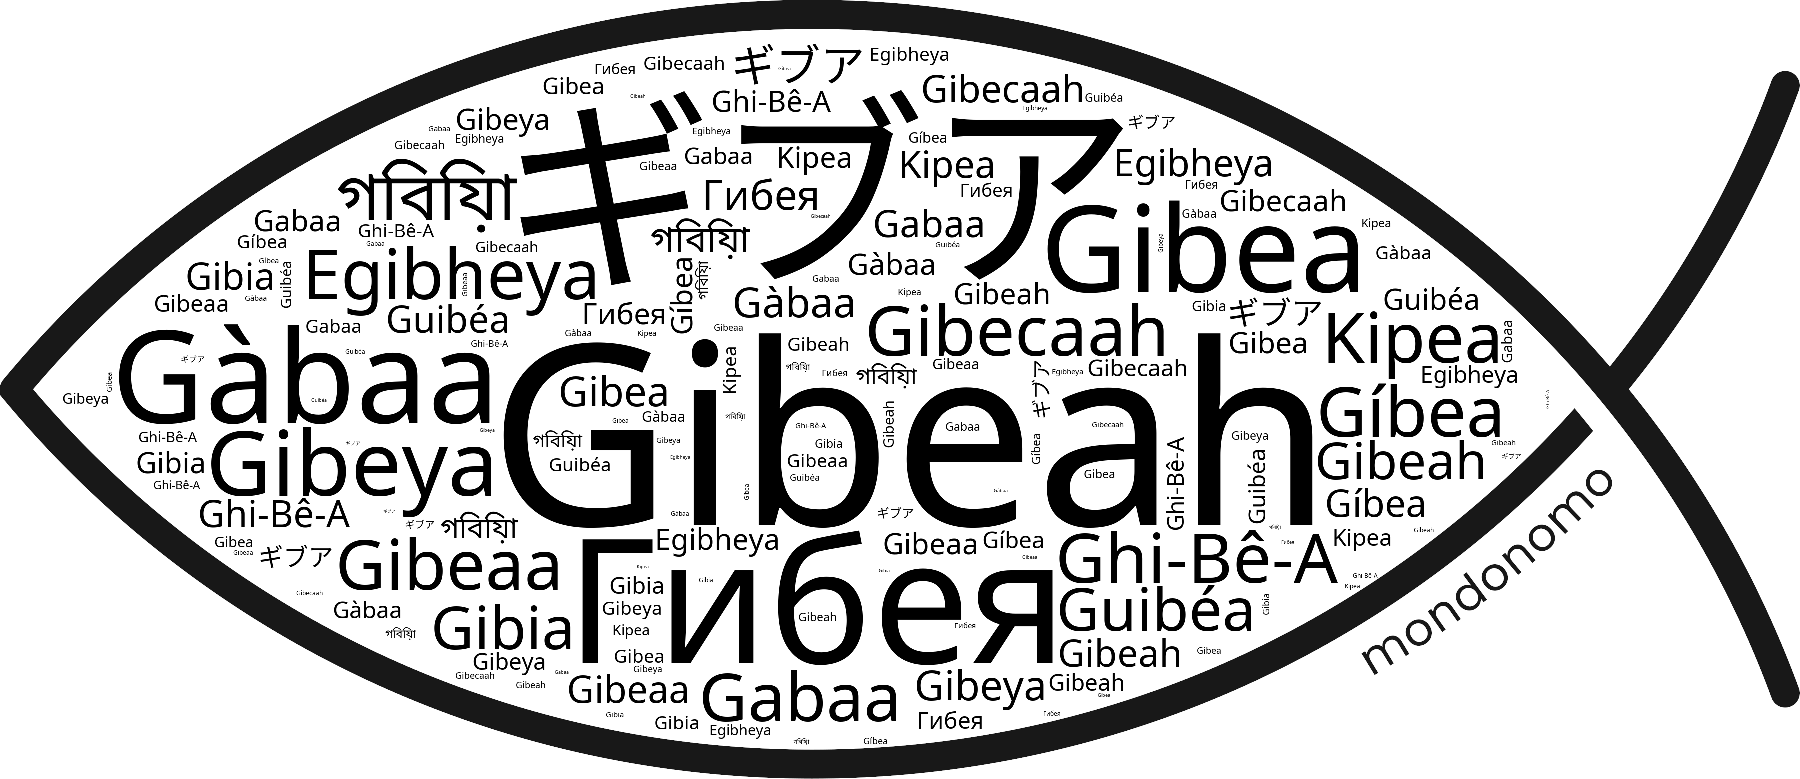 Name Gibeah in the world's Bibles